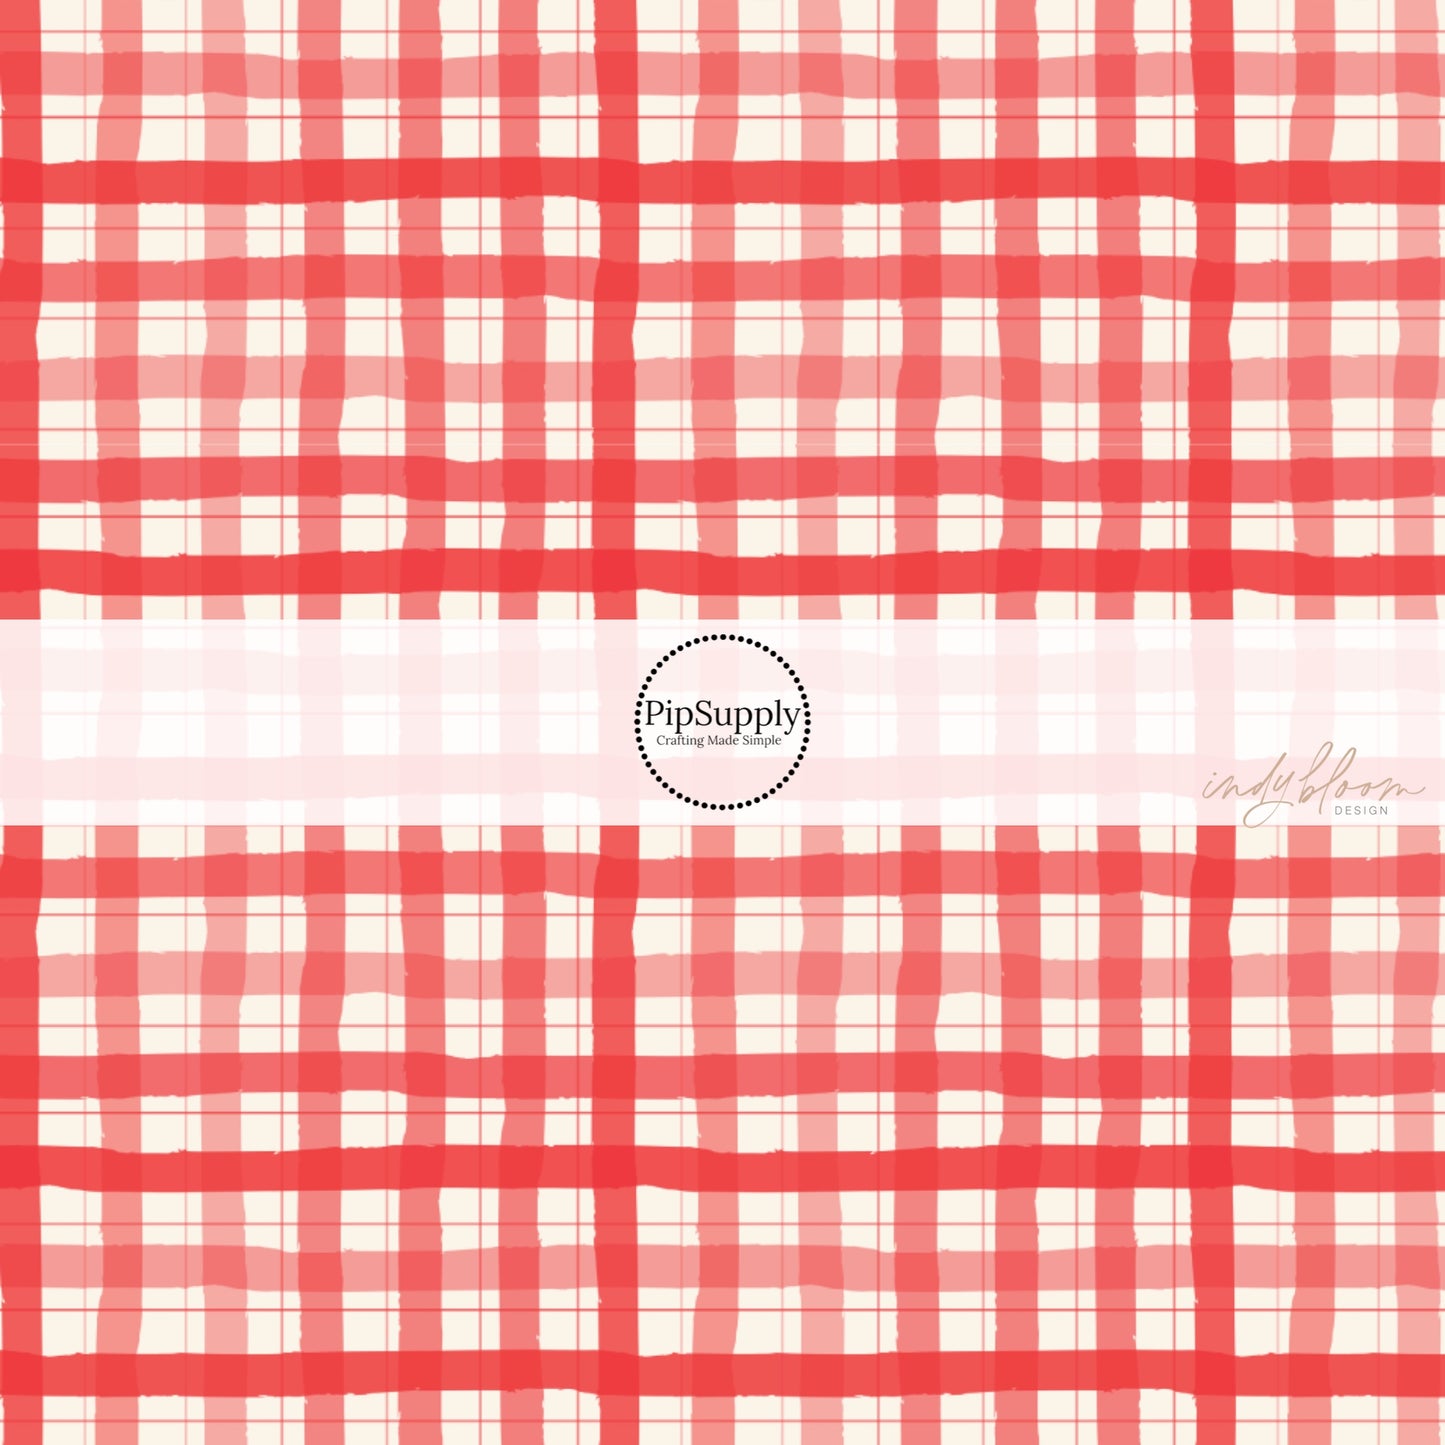 These holiday pattern themed fabric by the yard features red and cream plaid pattern. This fun Christmas fabric can be used for all your sewing and crafting needs!